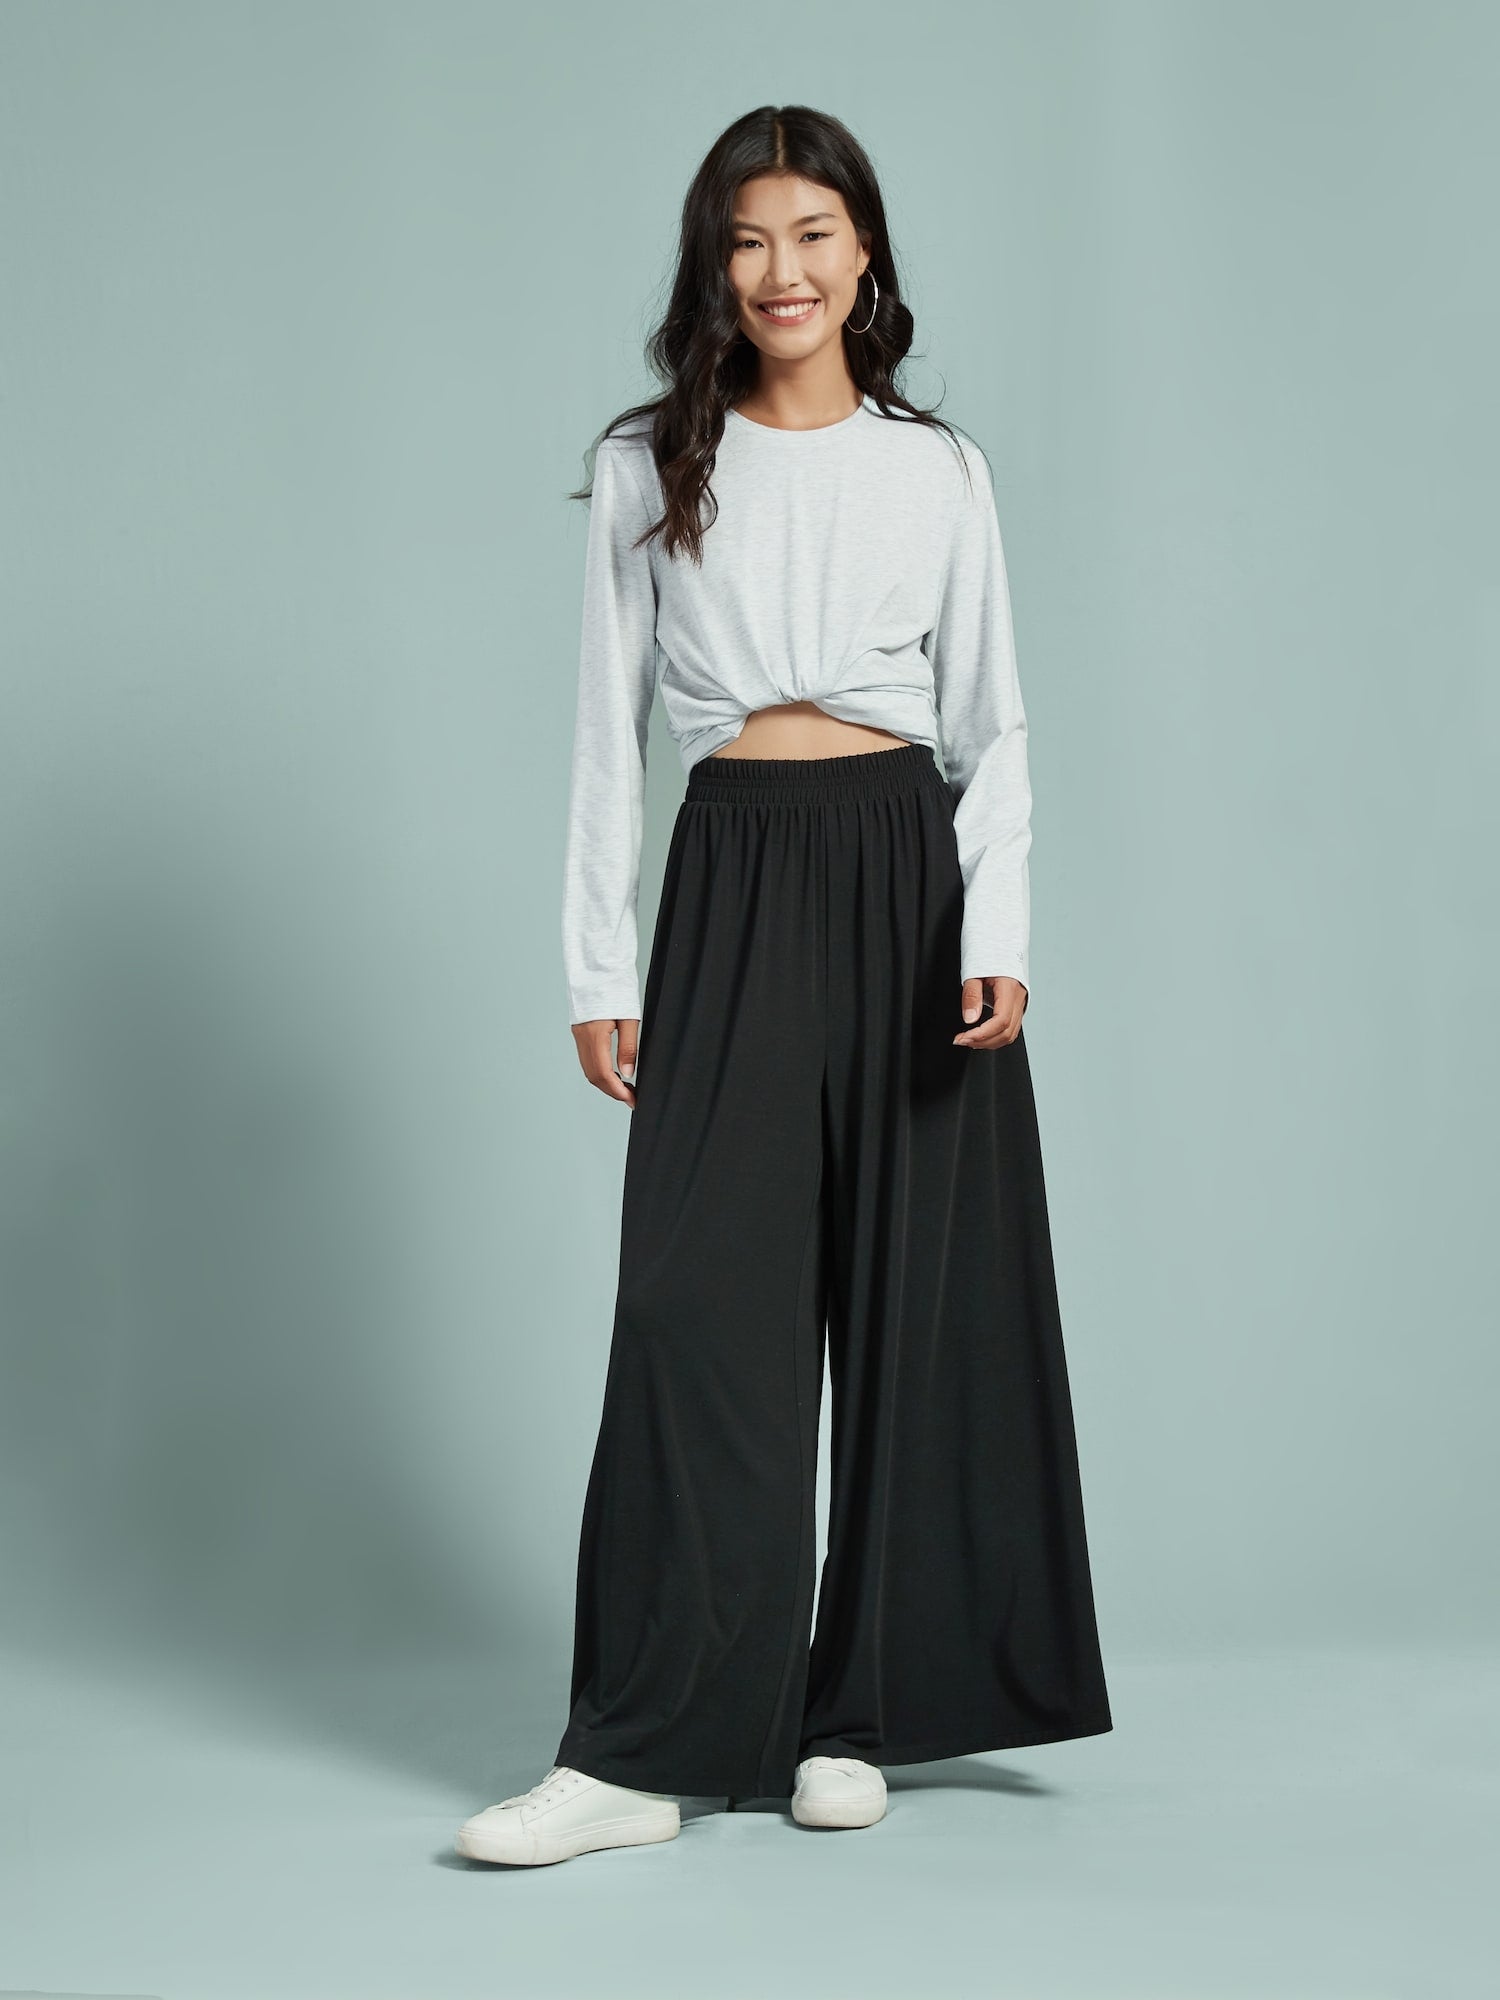 Basic Moves Palazzo Pant- Adult - The Dance Store